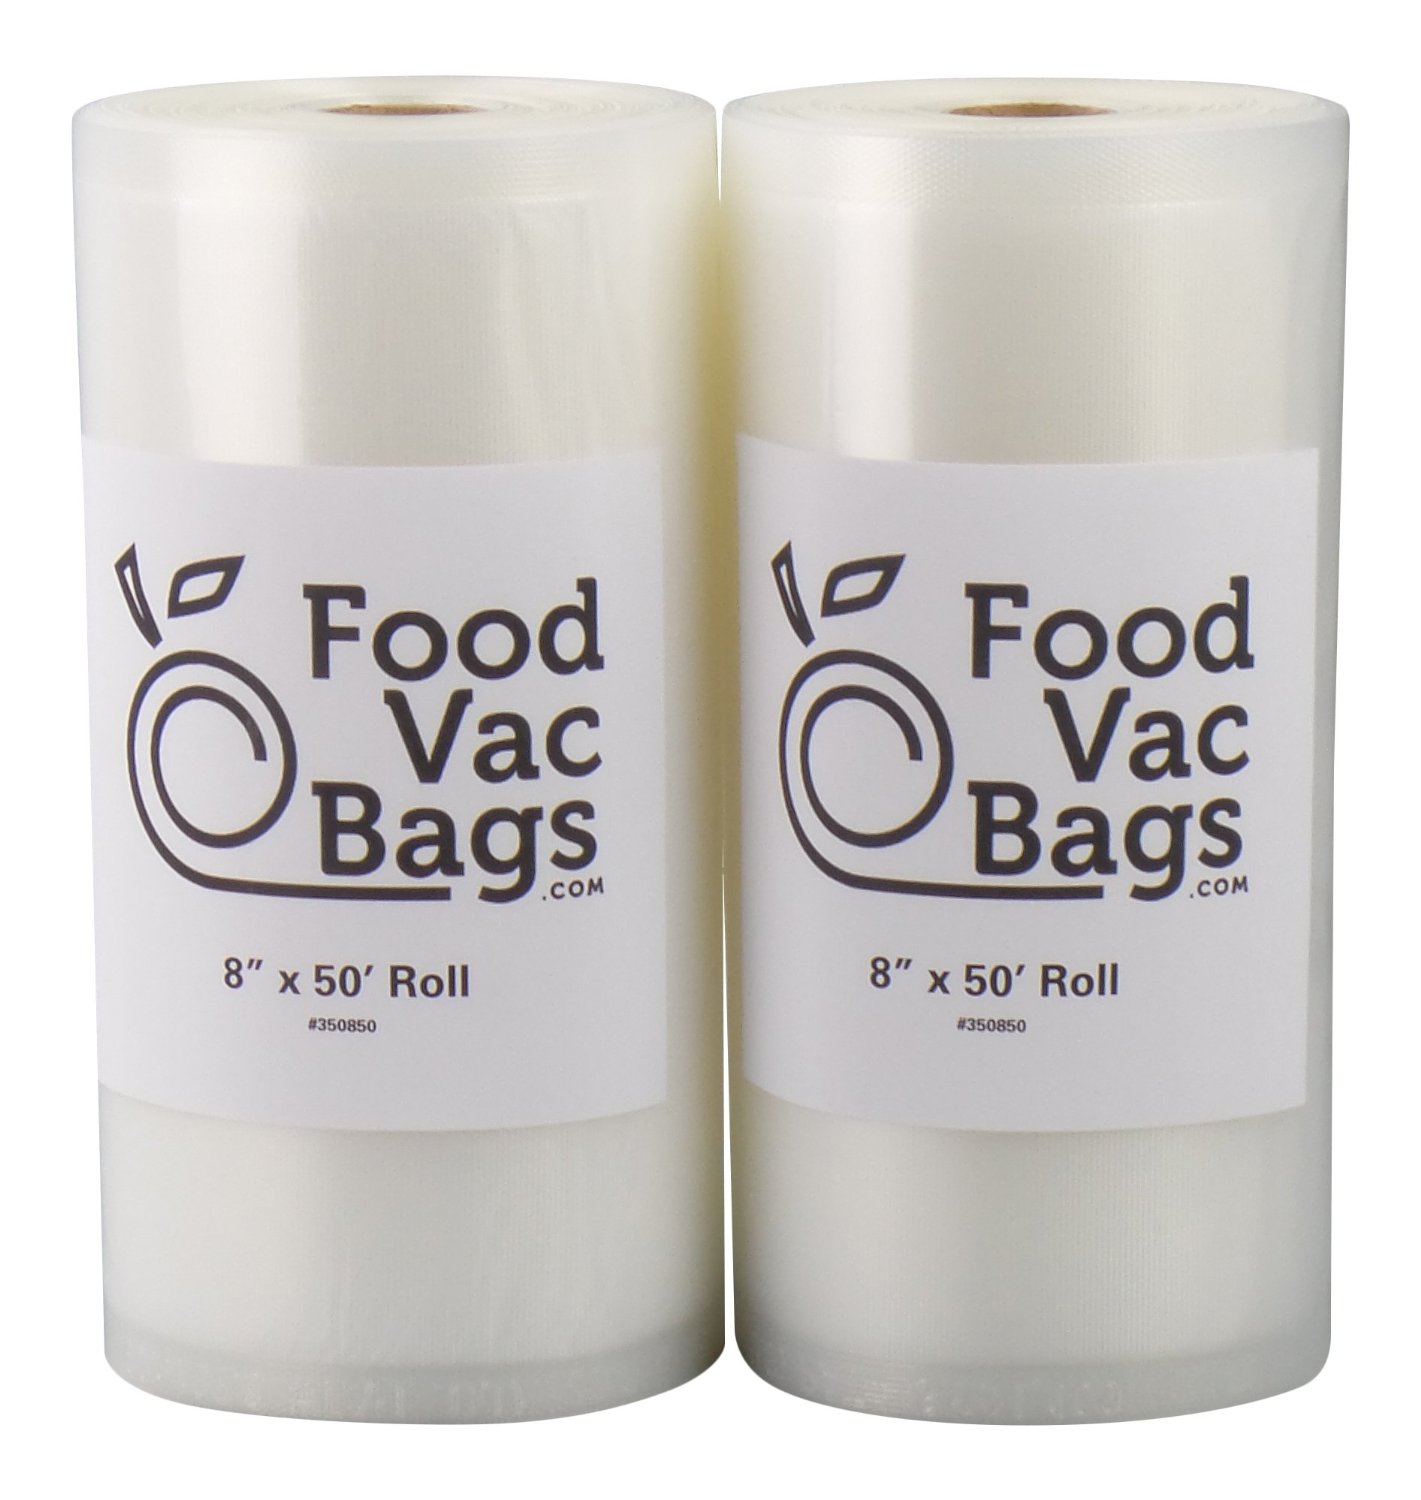 2 8"X50' Rolls of FoodVacBags 4 mil Vacuum Sealer Bags - Make Your Own Size Bag!